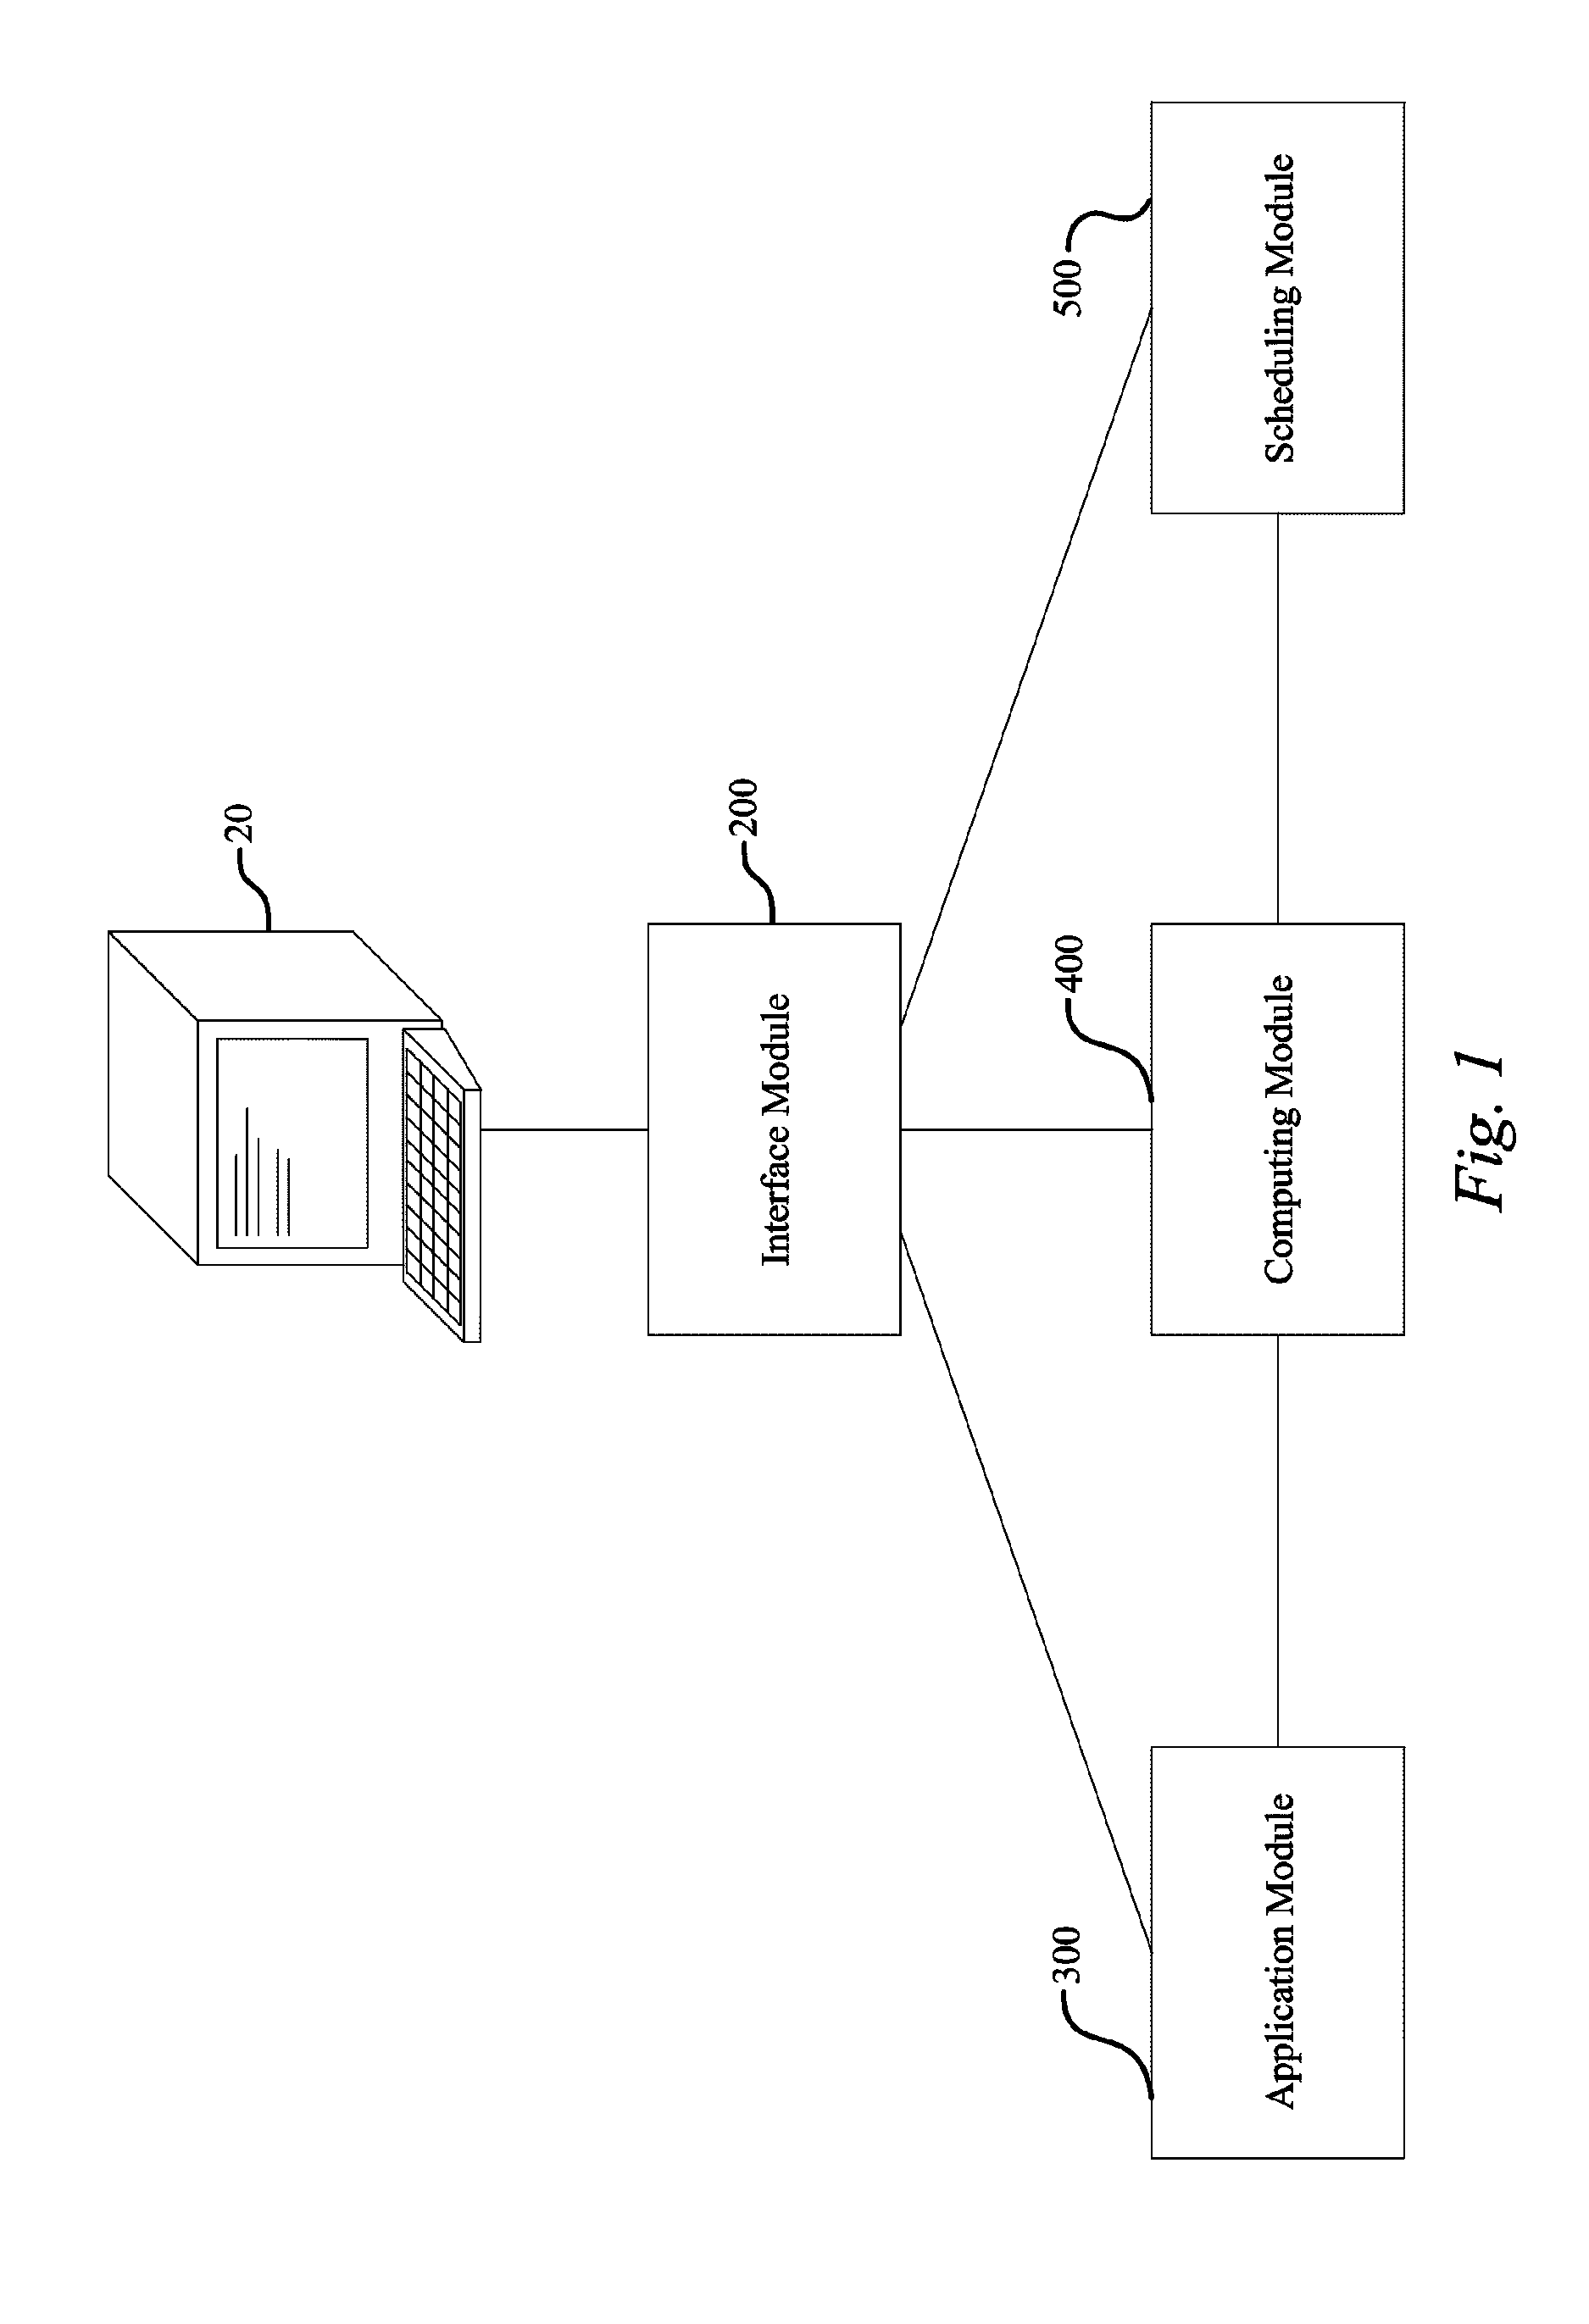 Remote high-performance computing material joining and material forming modeling system and method